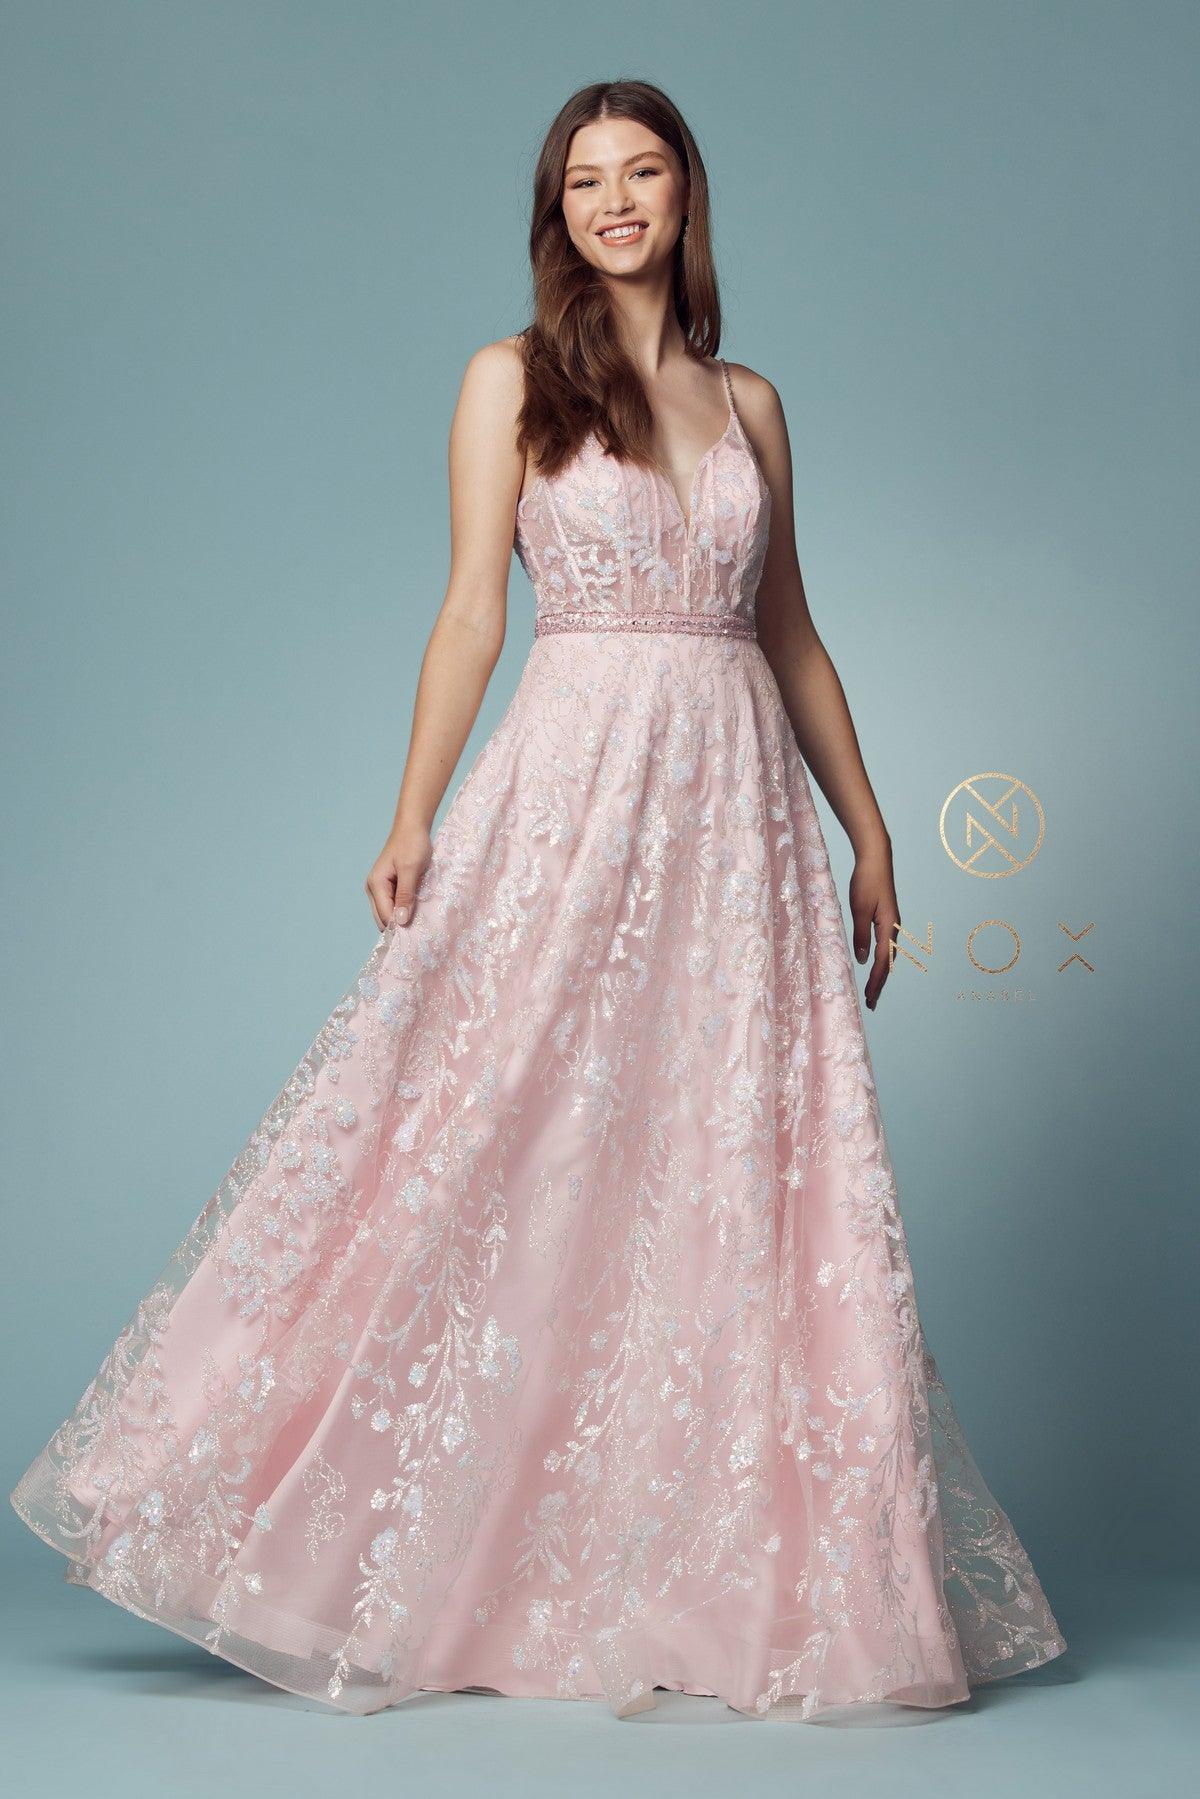 Spaghetti Strap A-Line Long Prom Dress - The Dress Outlet